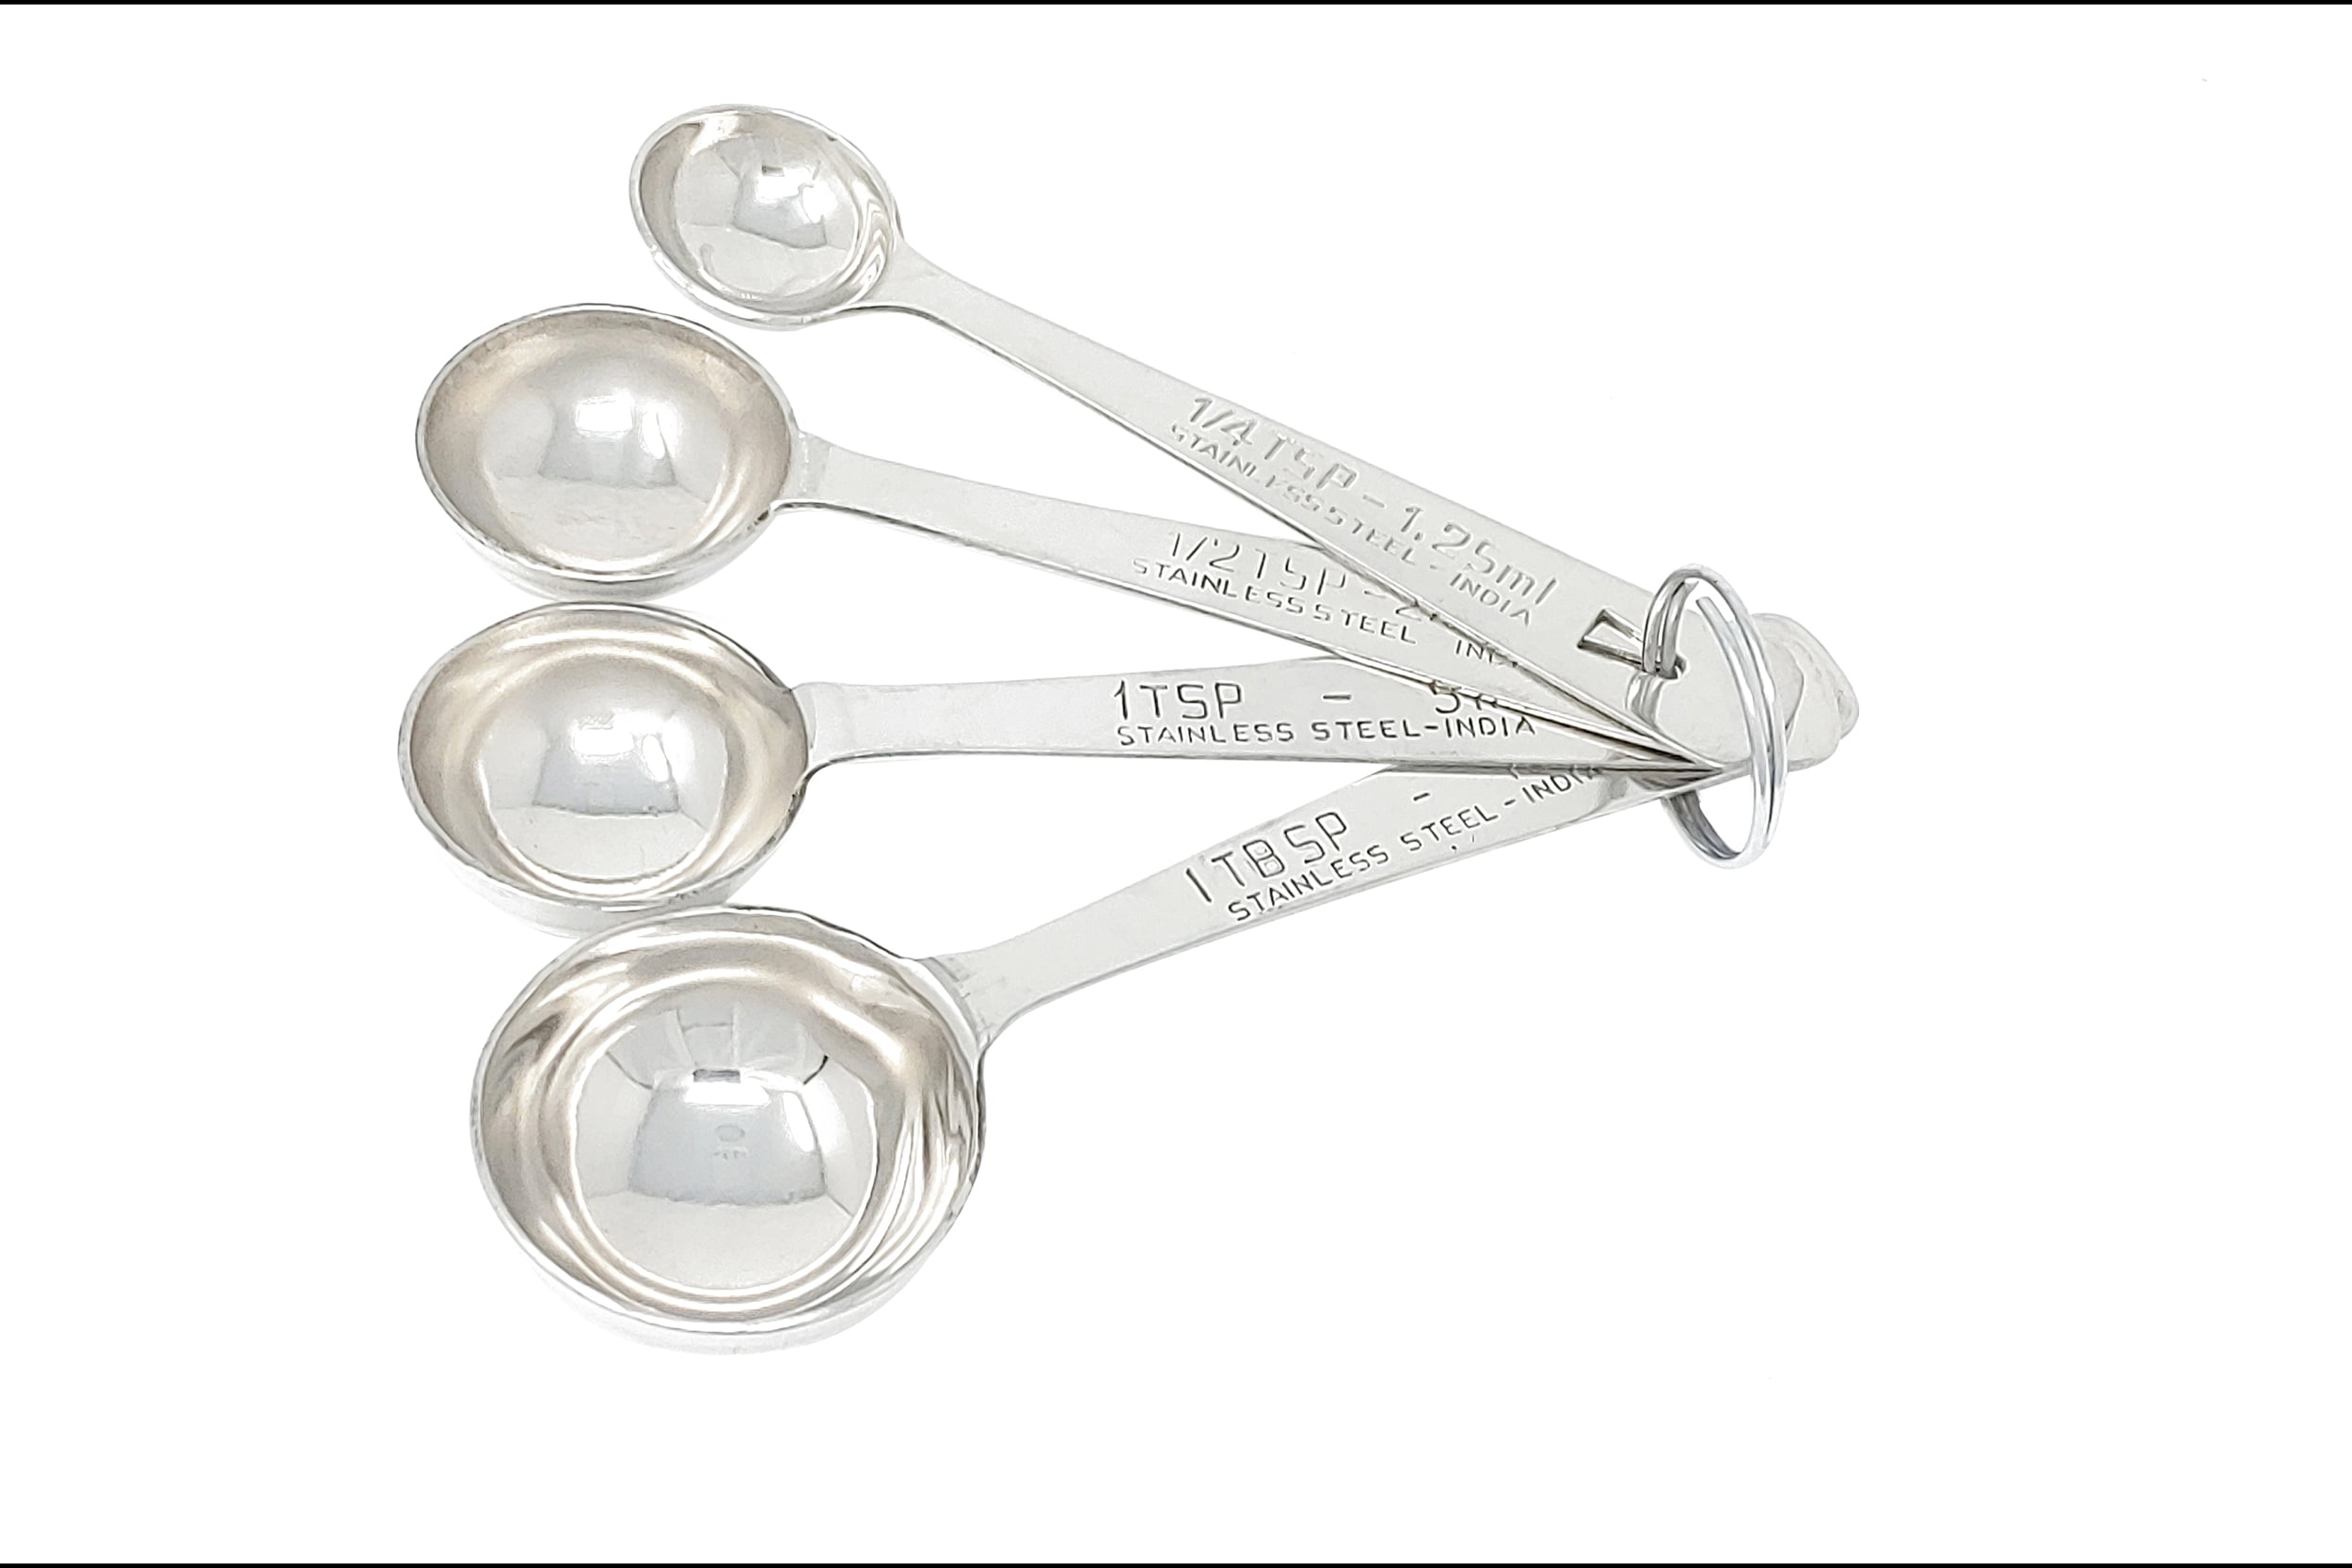 HUBERT® Stainless Steel Measuring Spoon Set with Long Wire Handles